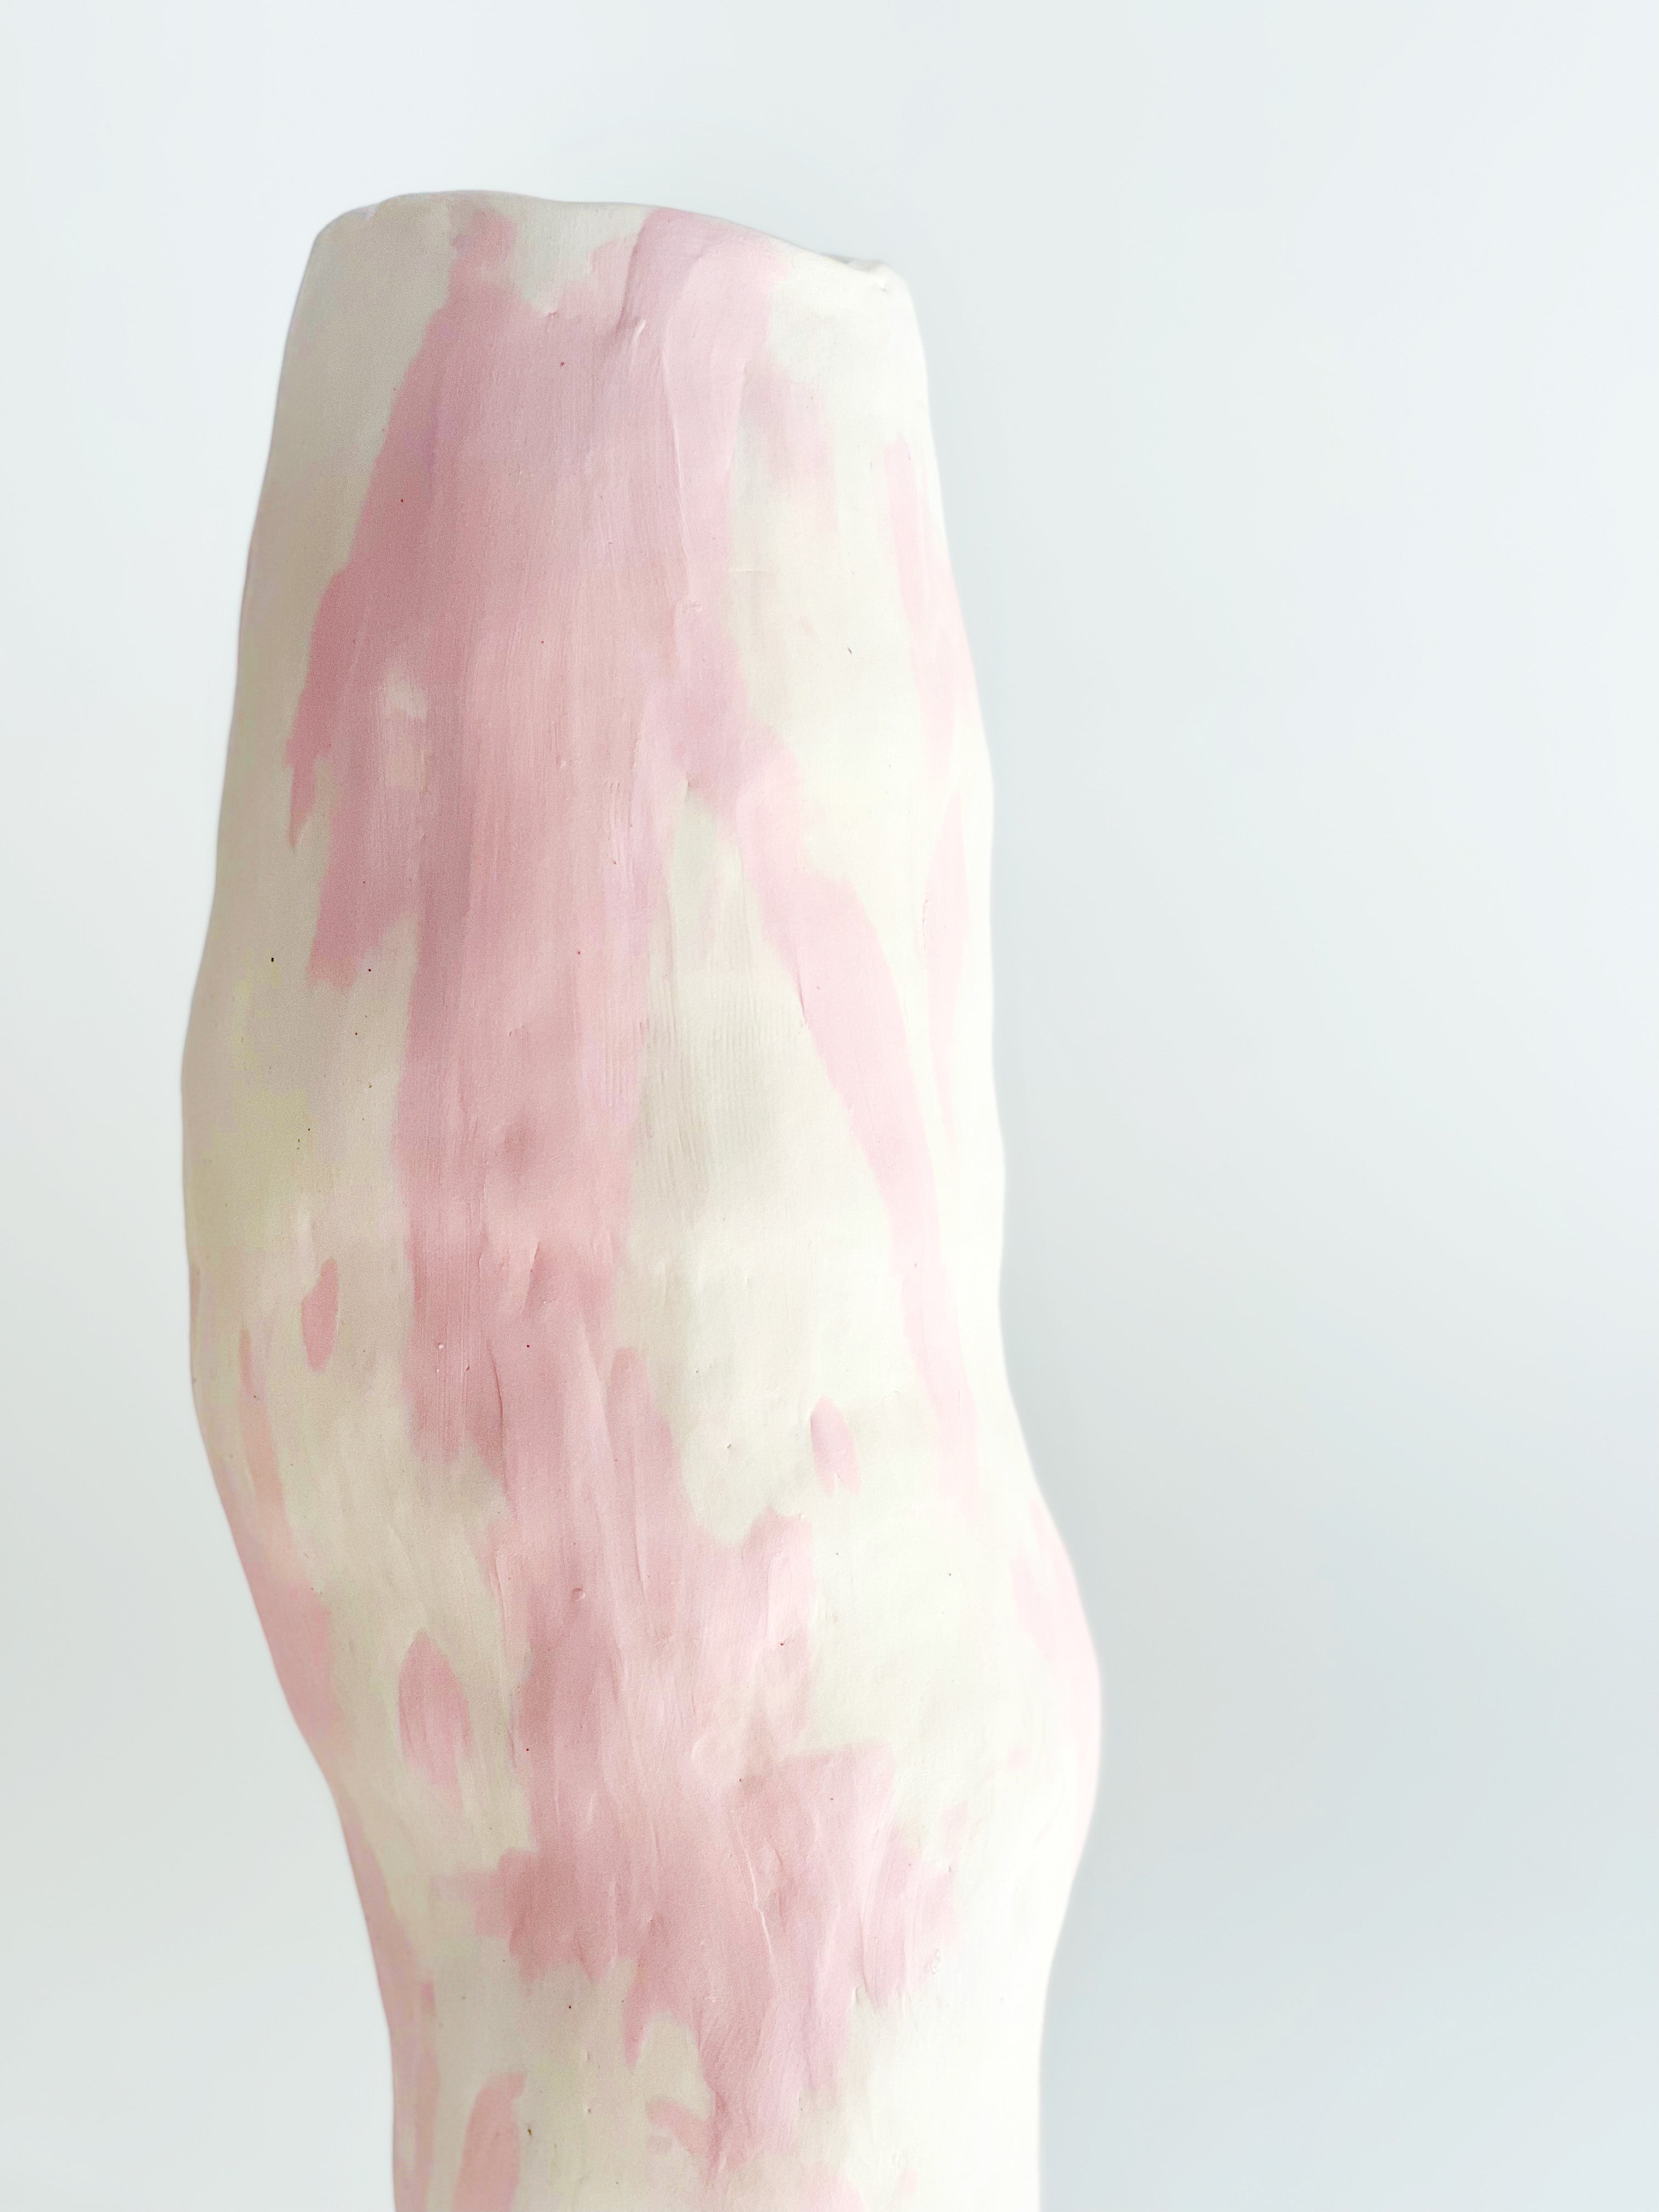 Ready to ship: Tall Pink on Cream Flow Vase